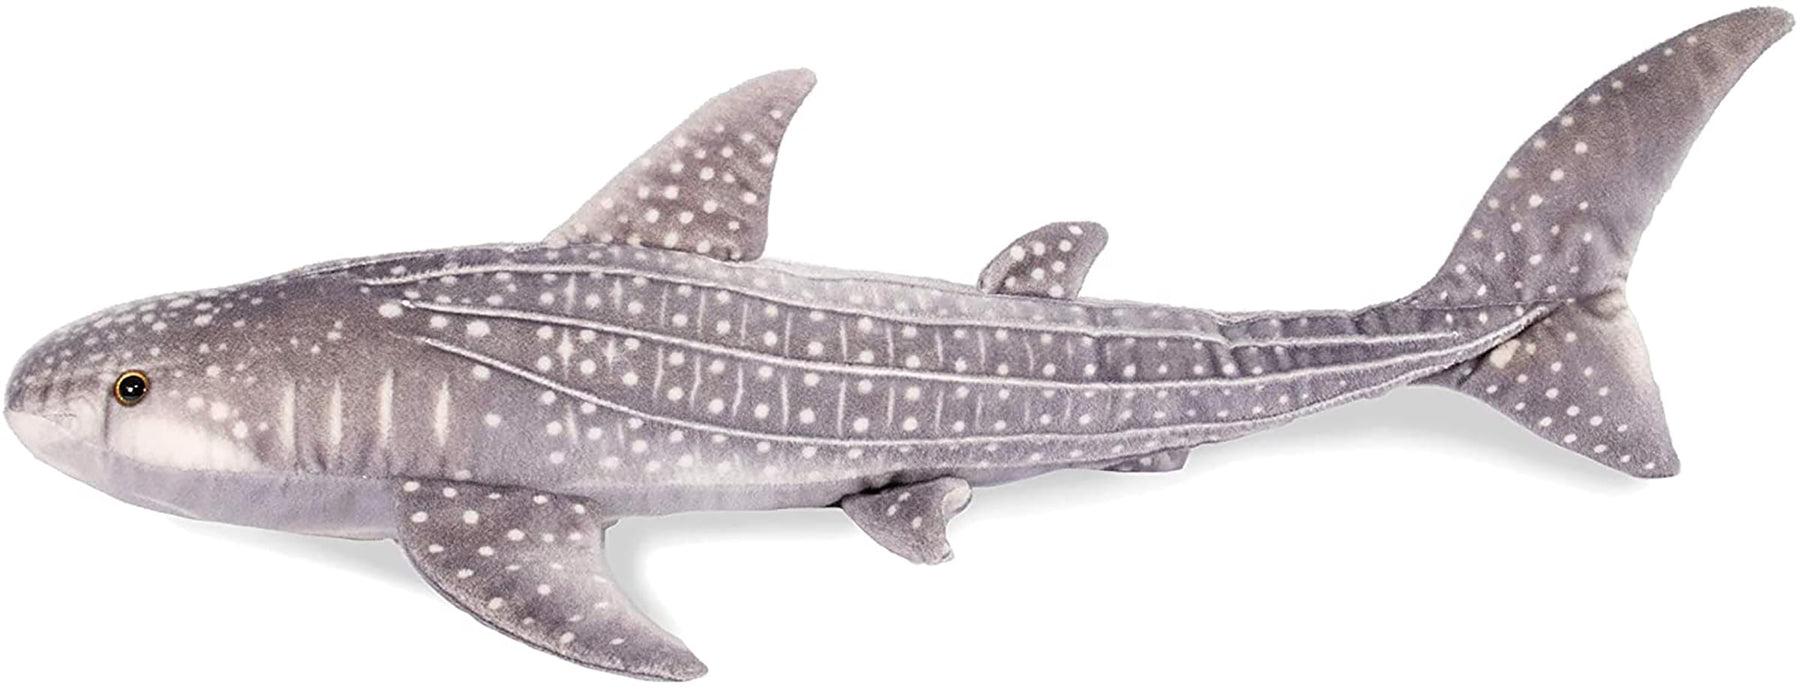 Real Planet Whale Shark Purple 30 Inch Realistic Soft Plush